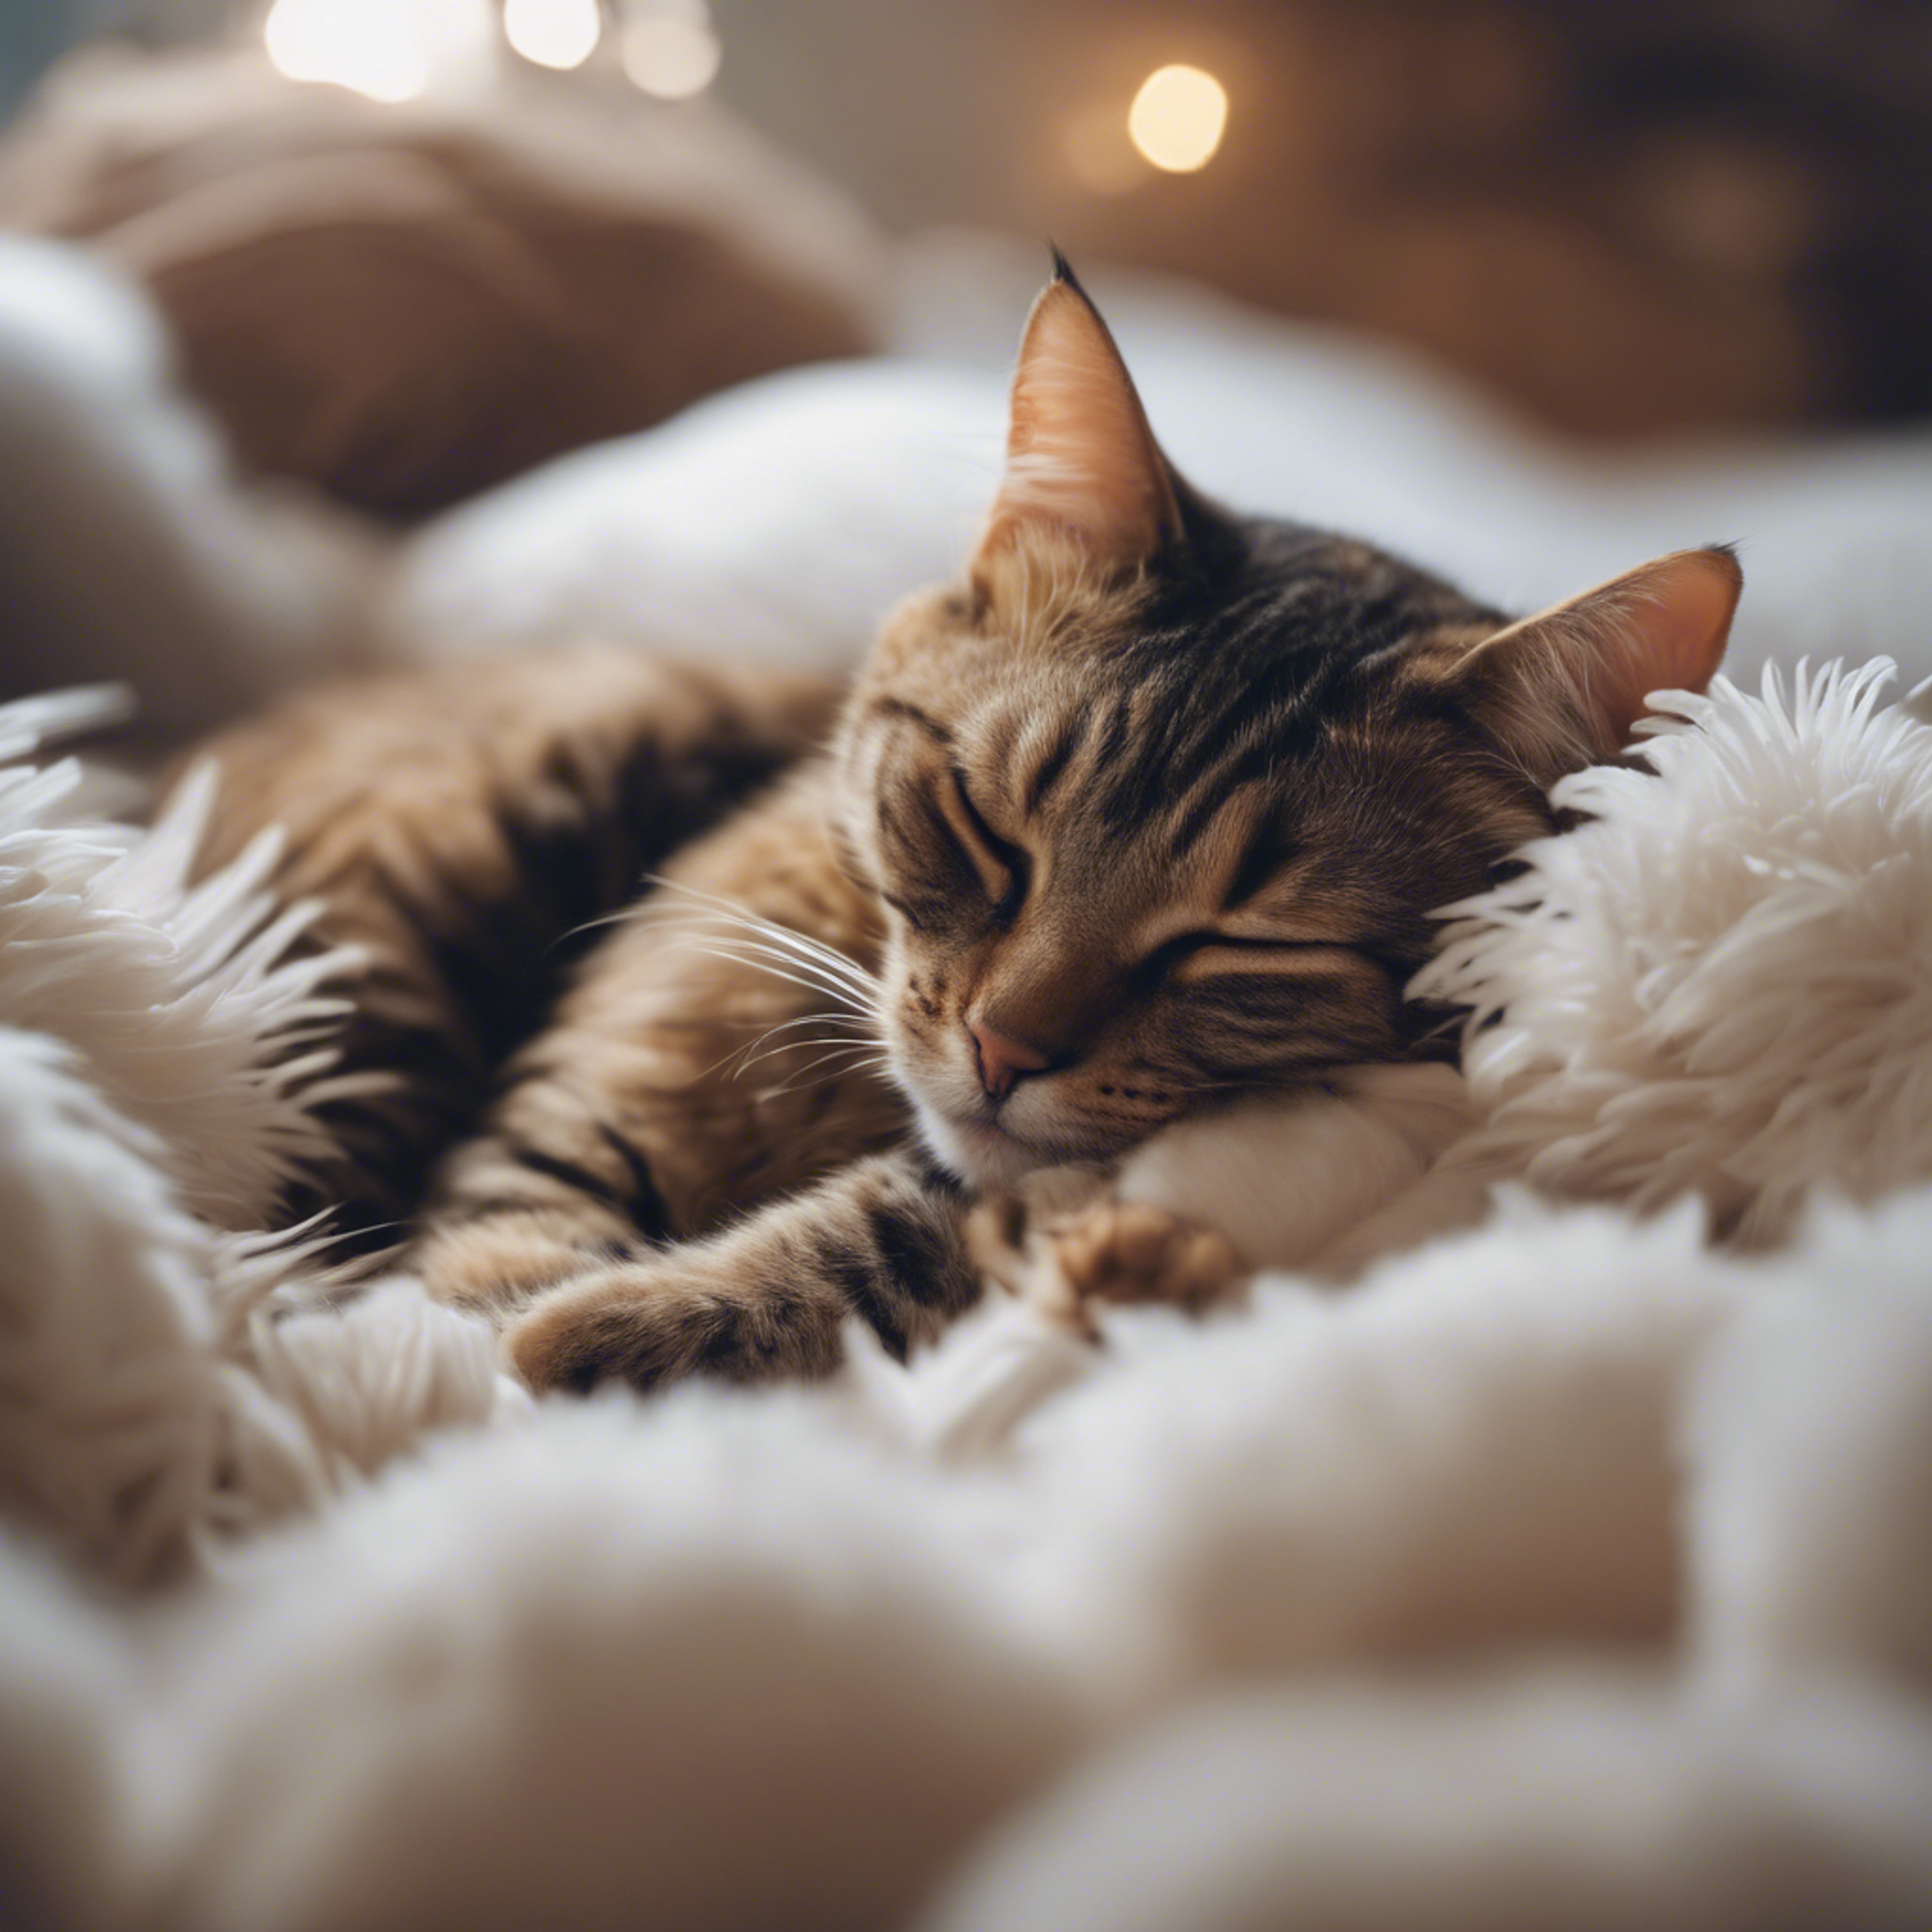 A cat sleeping soundly, completely submerged in a sea of cozy, fluffy pillows. Tapet[9e78fe4df88a4e90bb06]